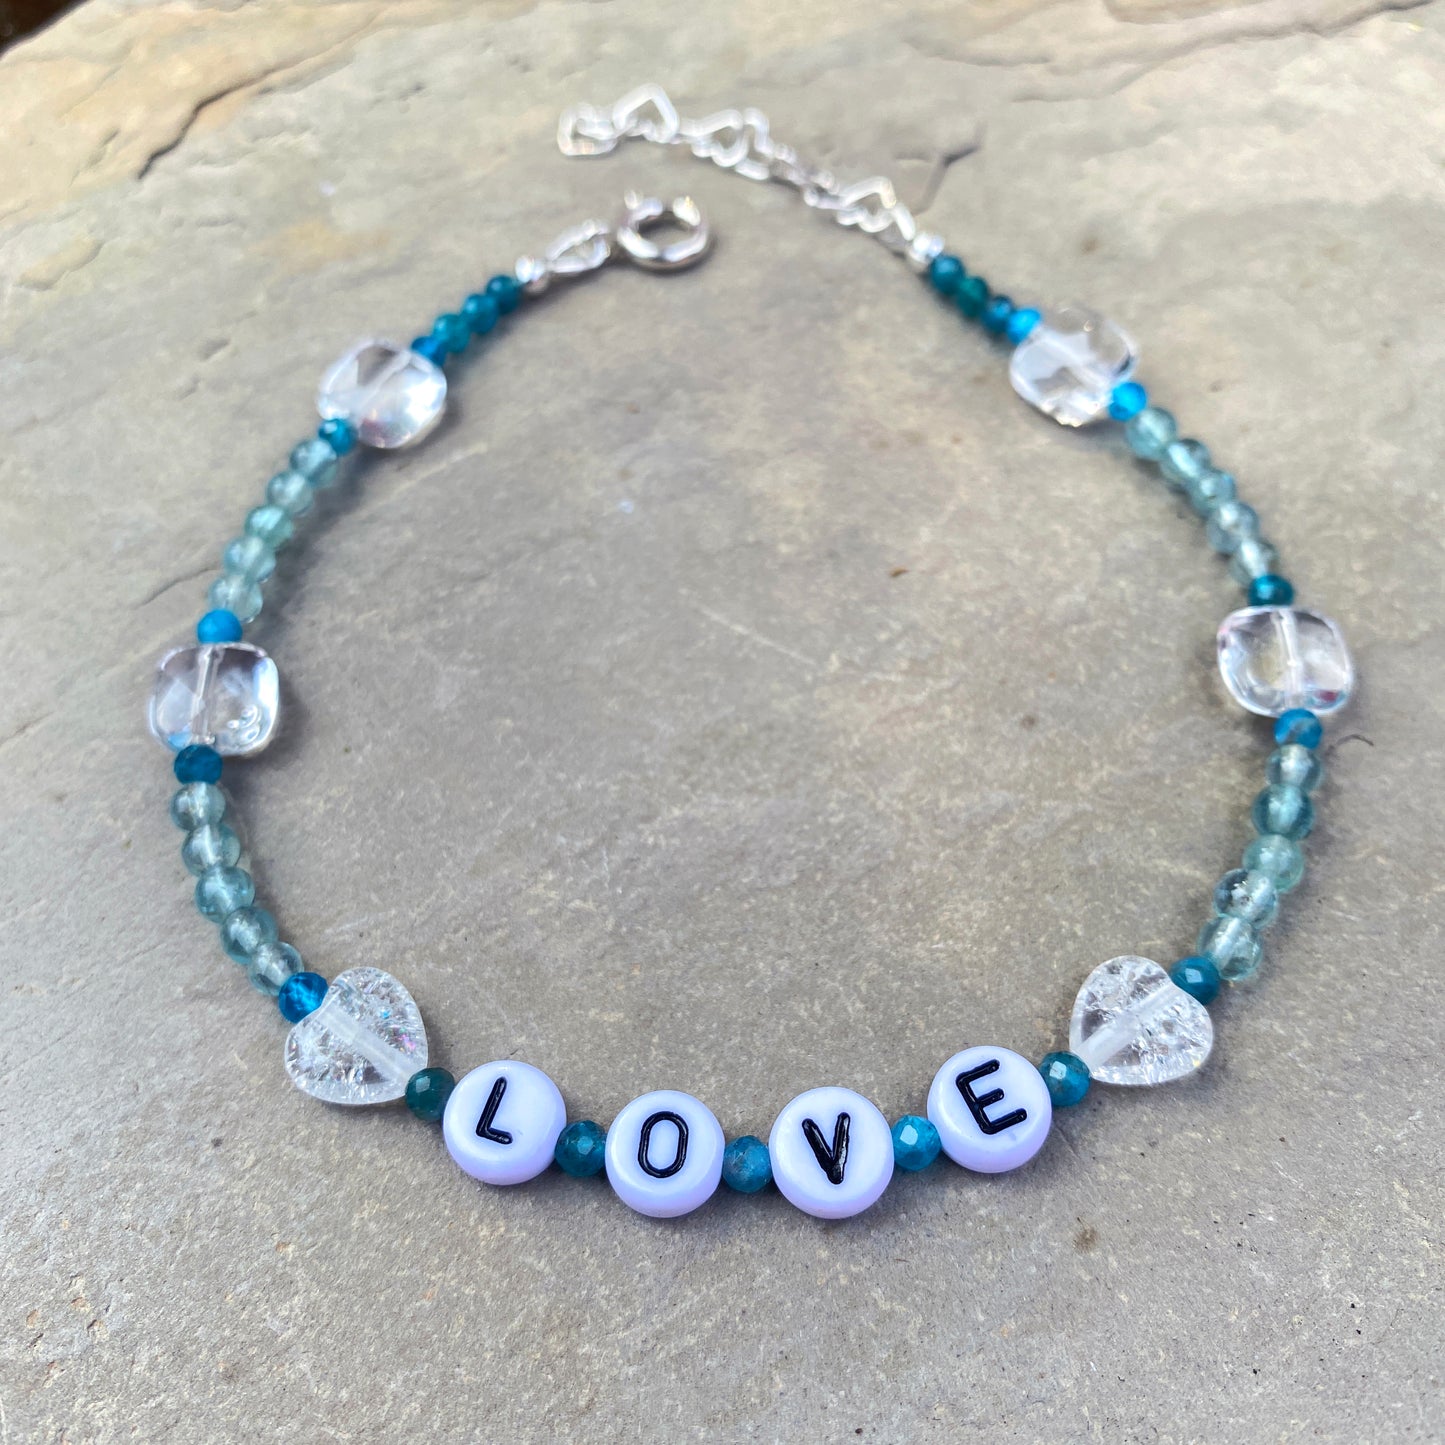 Blue Apatite “LOVE” anklet with Clear Quartz Gemstone heart beads